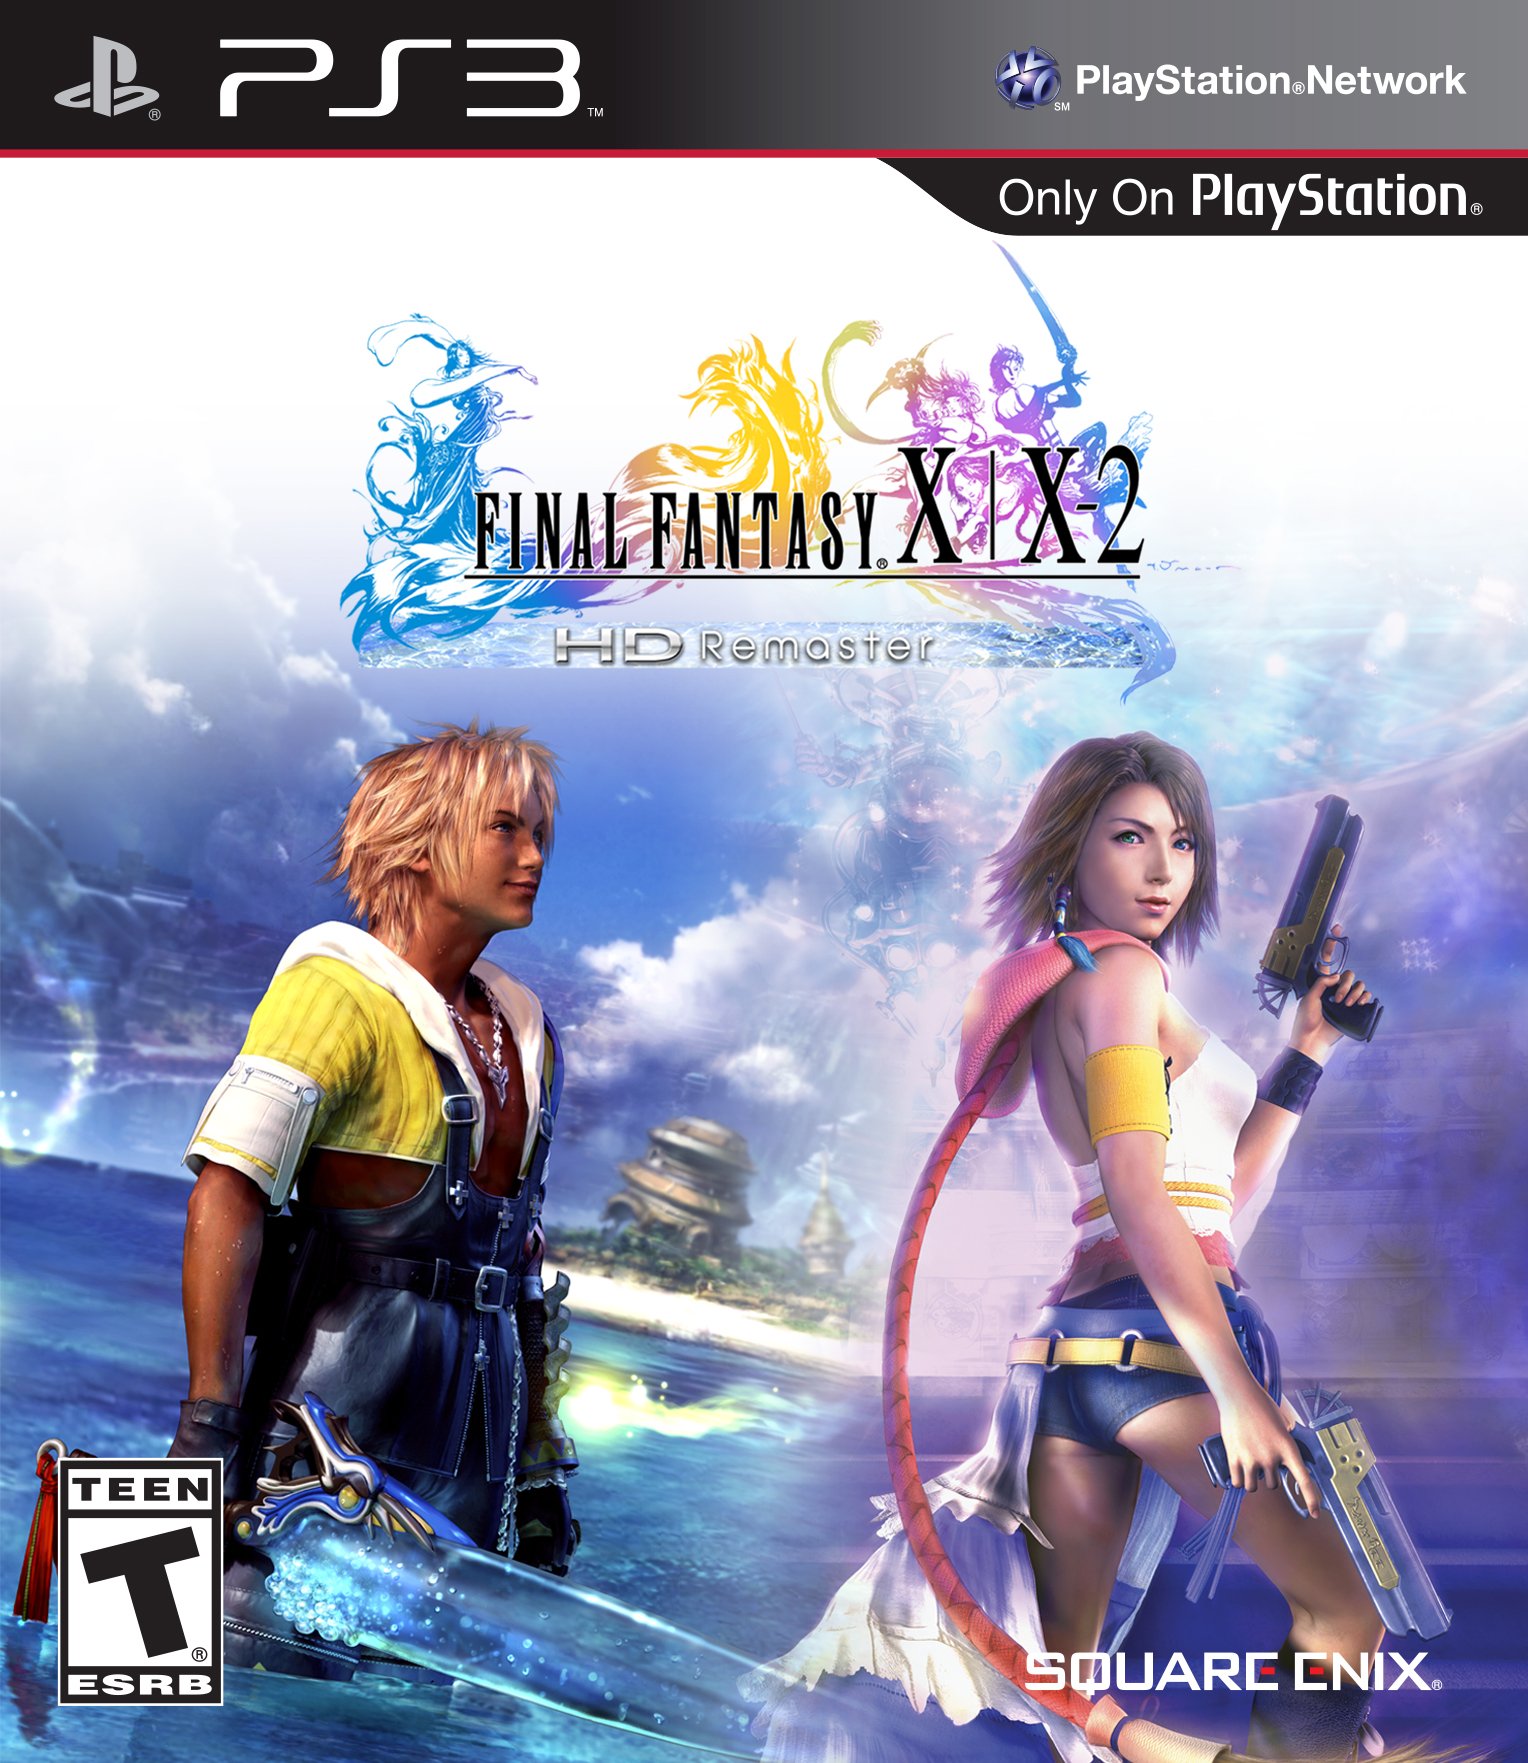 Final Fantasy X / X-2 HD Remaster, Square Enix, PlayStation 3, [Physical], 662248912264 - image 1 of 9